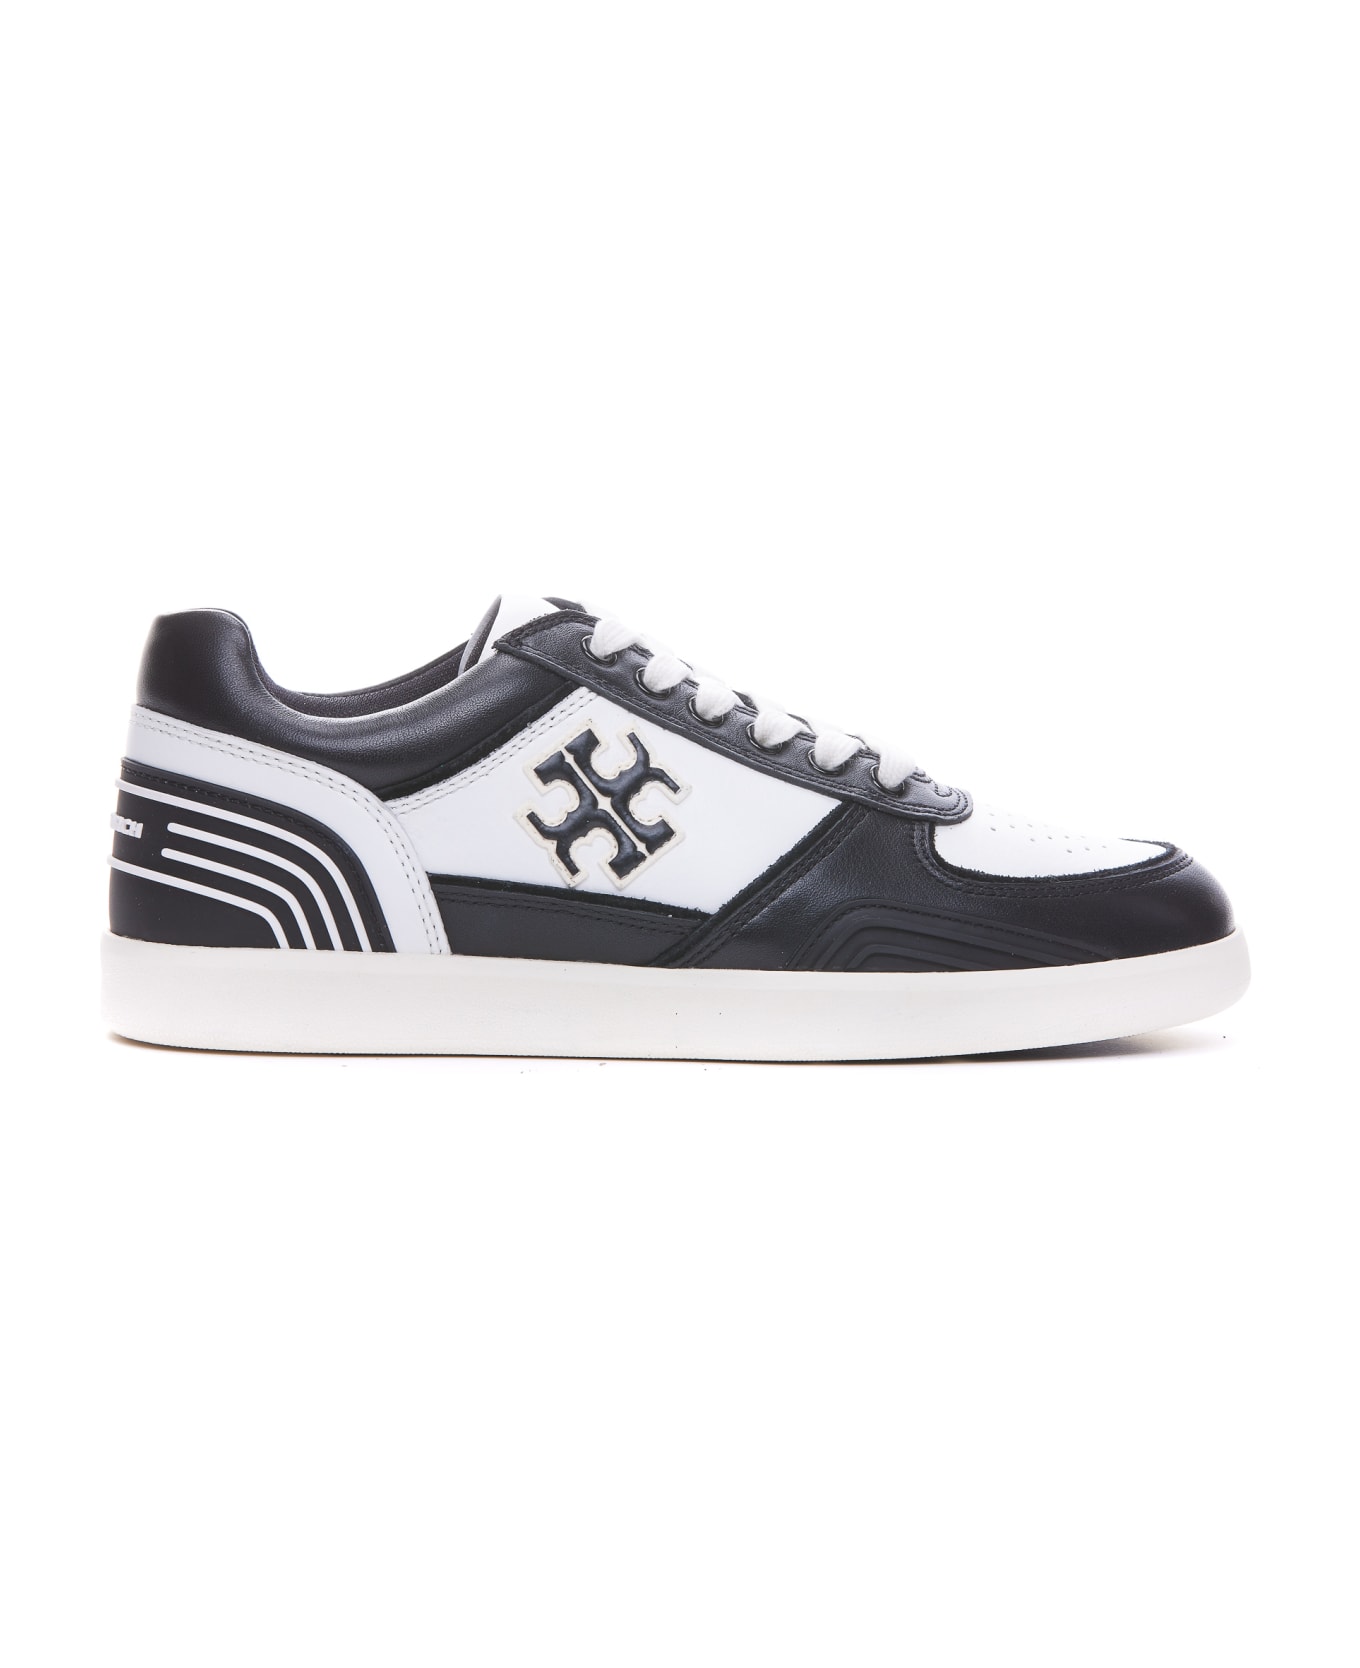 Tory Burch Clover Court Leather Low-top Sneakers - White